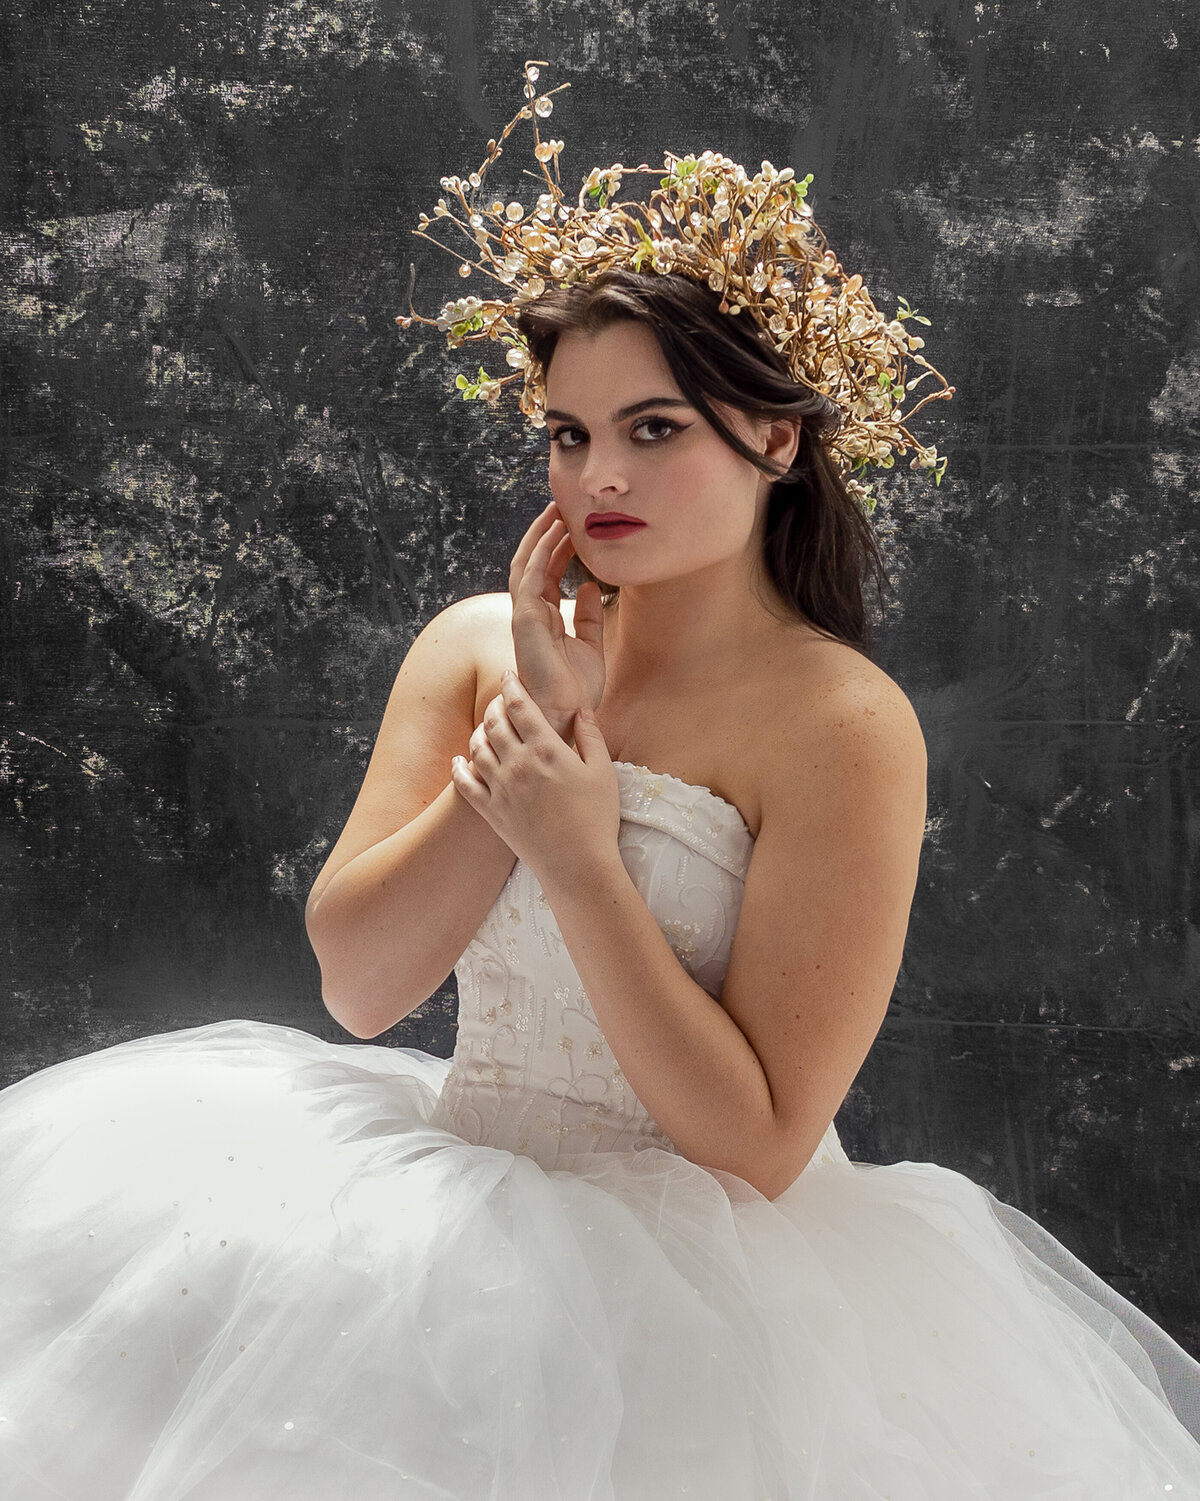 woman in wedding dress and a crown of flowers holding right wrist and looking  forward with right hand on face